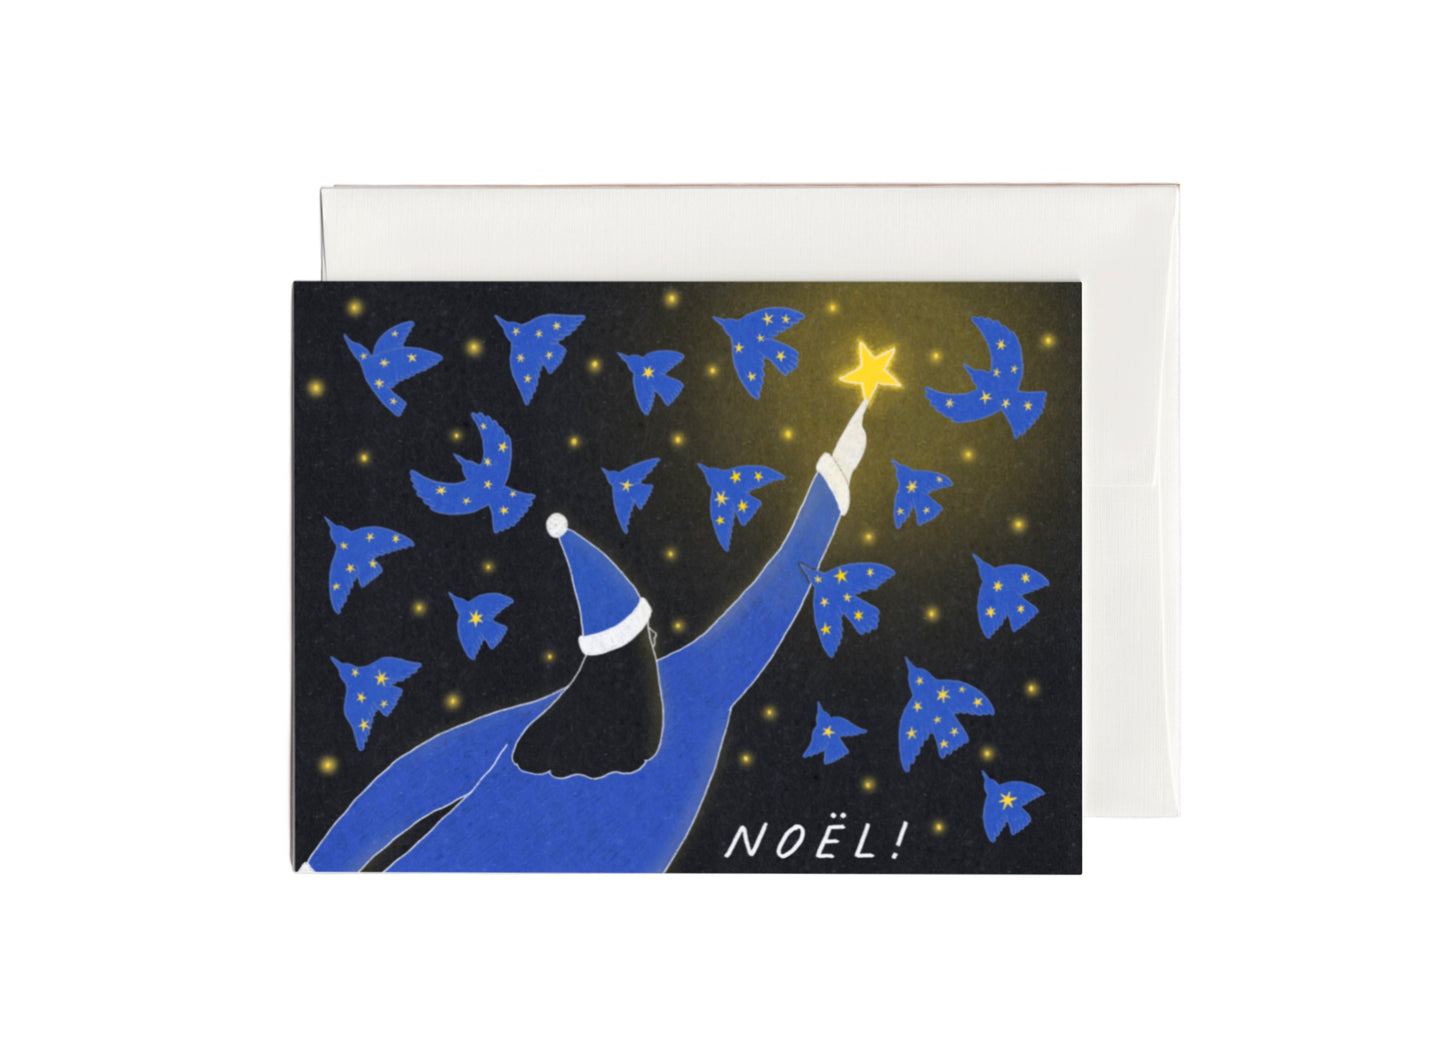 Dreamy french Christmas Card that says “NOEL” with the illustration of a blue female Santa Claus reaching to a star above her